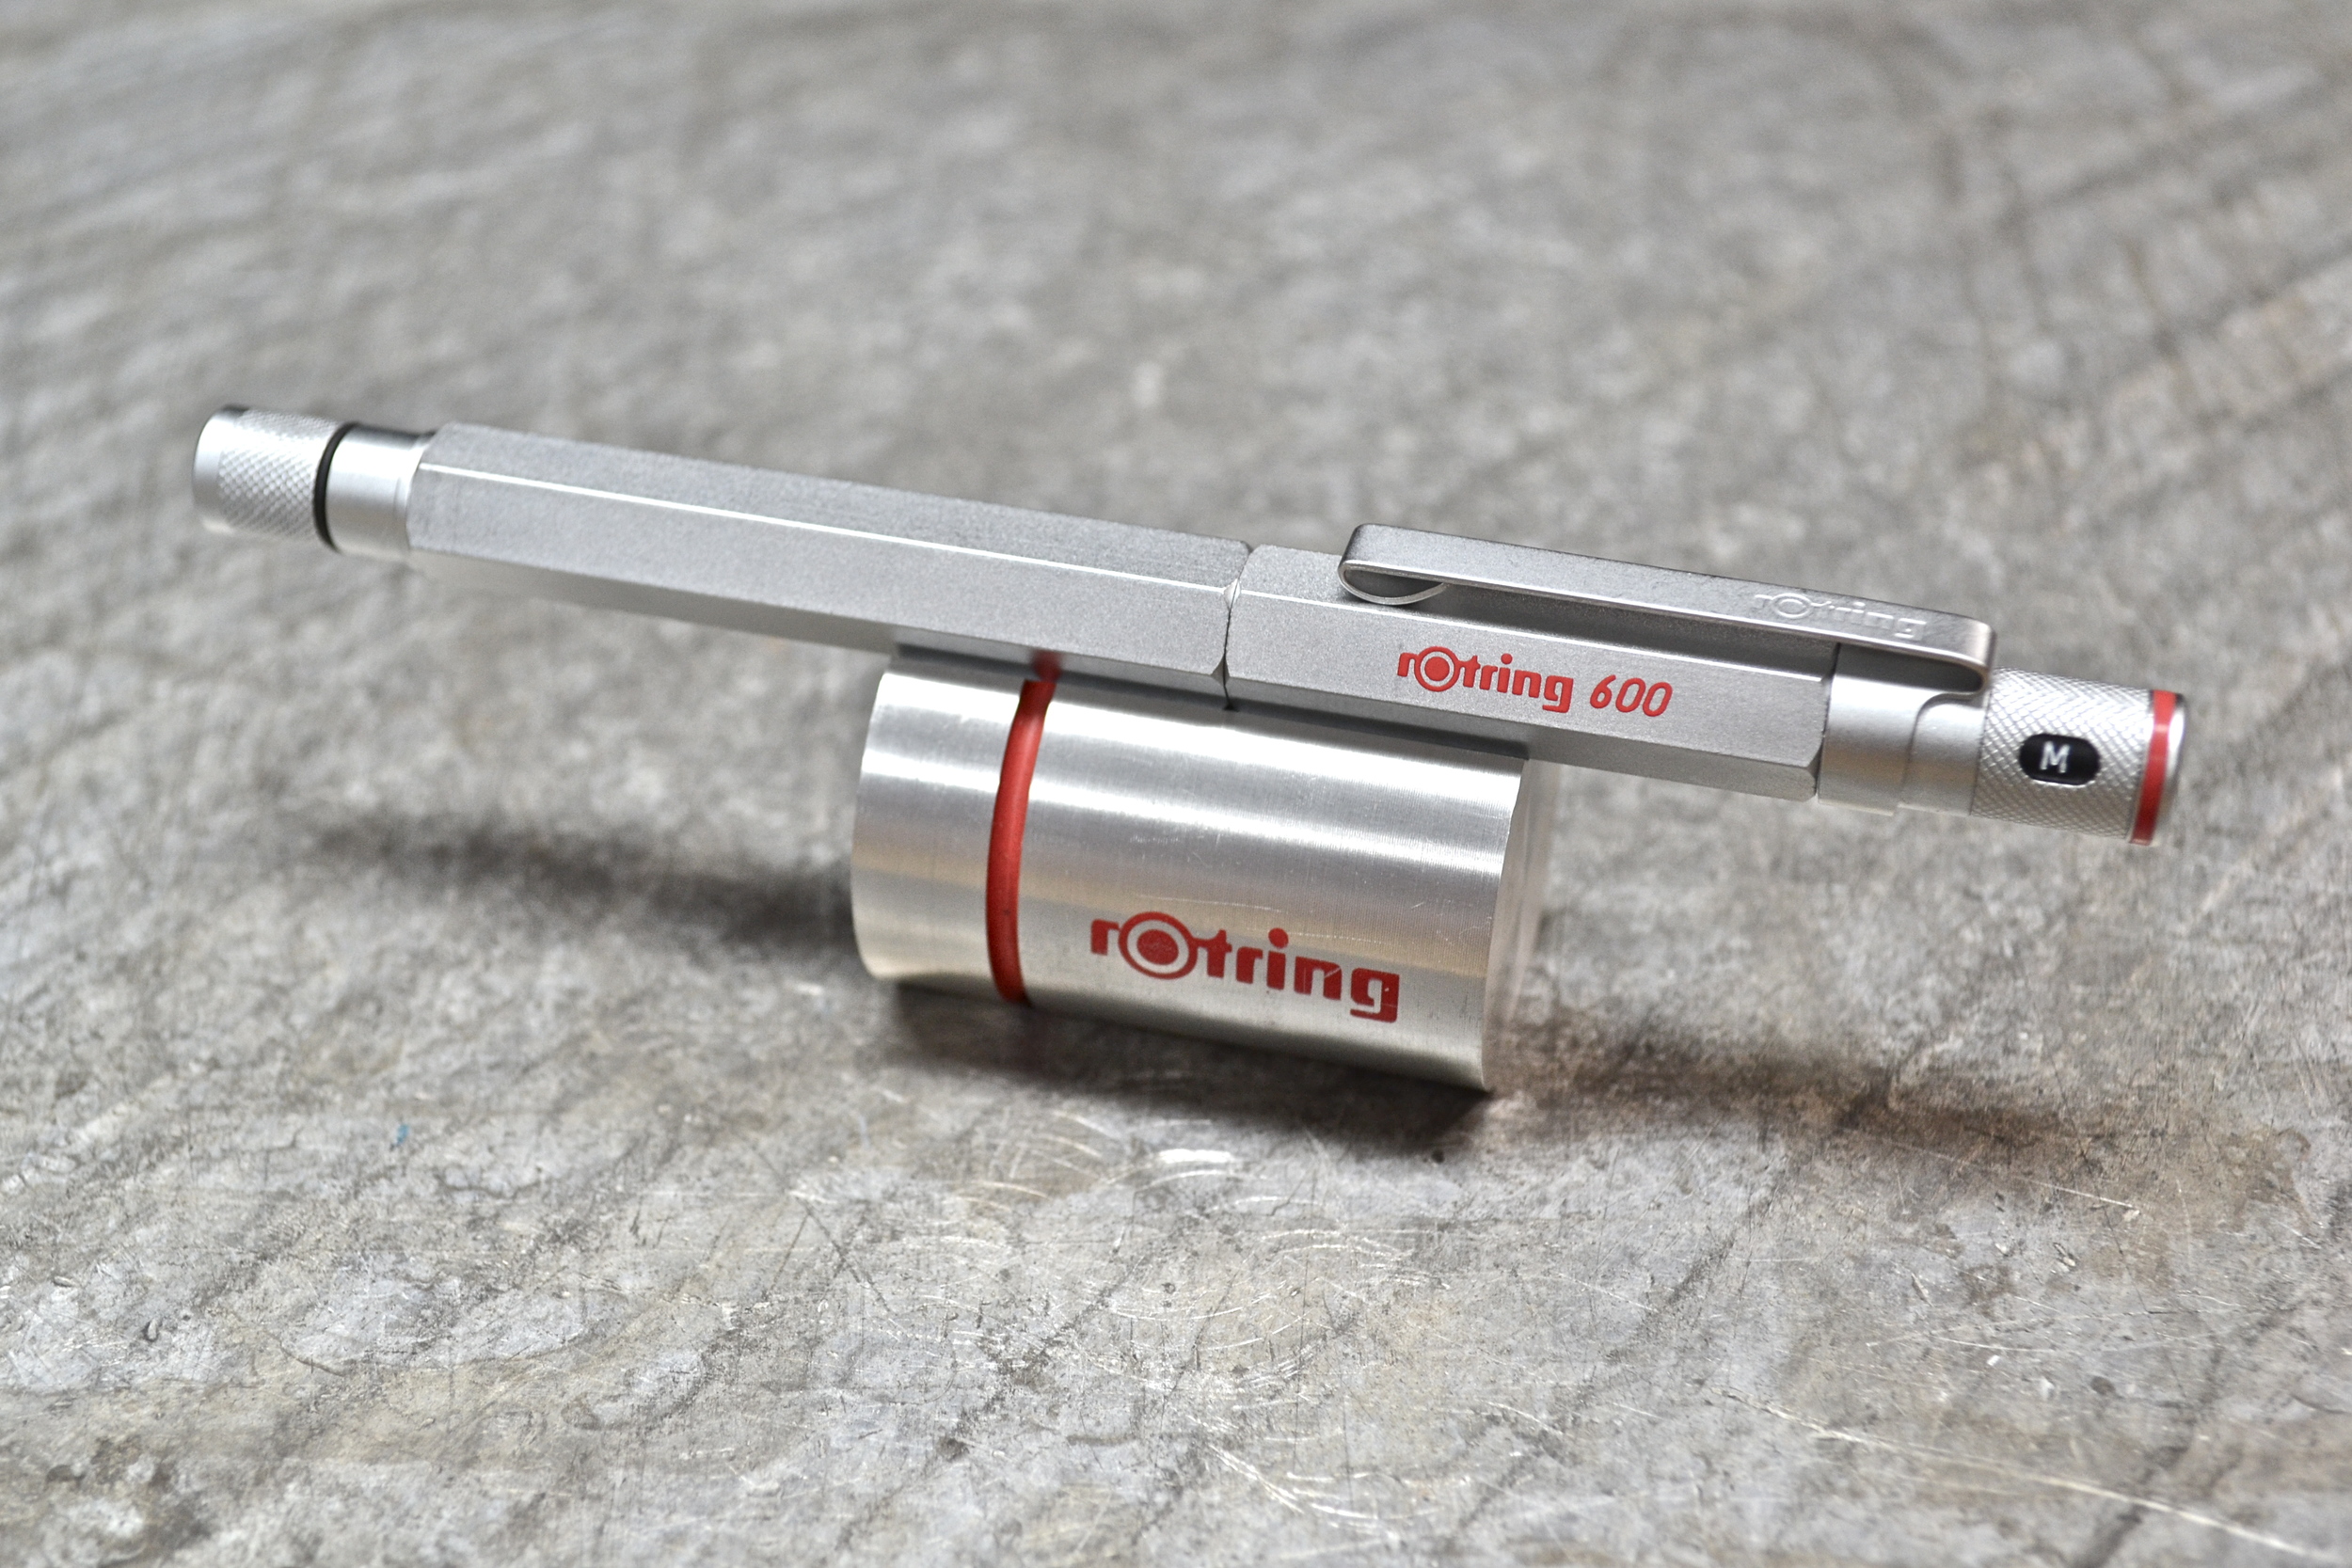 So, you want to buy a vintage rOtring? A guide of sorts. — The